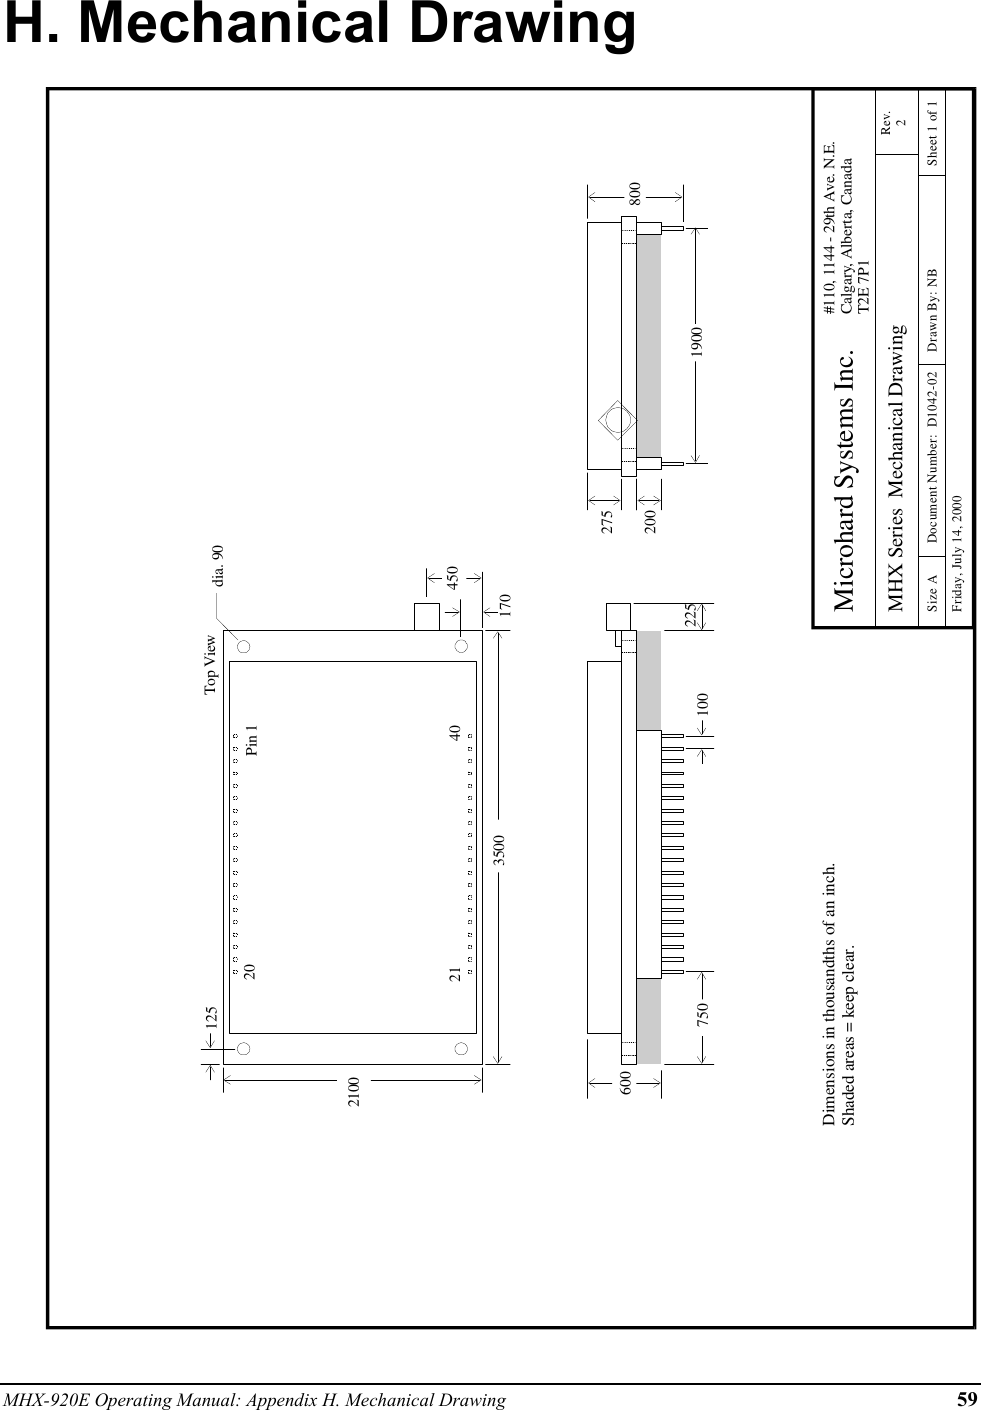 MHX-920E Operating Manual: Appendix H. Mechanical Drawing 59H. Mechanical Drawing21003500dia. 901701254507506001900100 225200275Dimensions in thousandths of an inch.Shaded areas = keep clear. Microhard Systems Inc.MHX Series  Mechanical Drawing#110, 1144 - 29th Ave. N.E.Calgary, Alberta, CanadaT2E 7P1Rev.2Size A Document Number:  D1042-02 Drawn By: NB Sheet 1 of 1Friday, July 14, 2000800Top ViewPin 12021 40